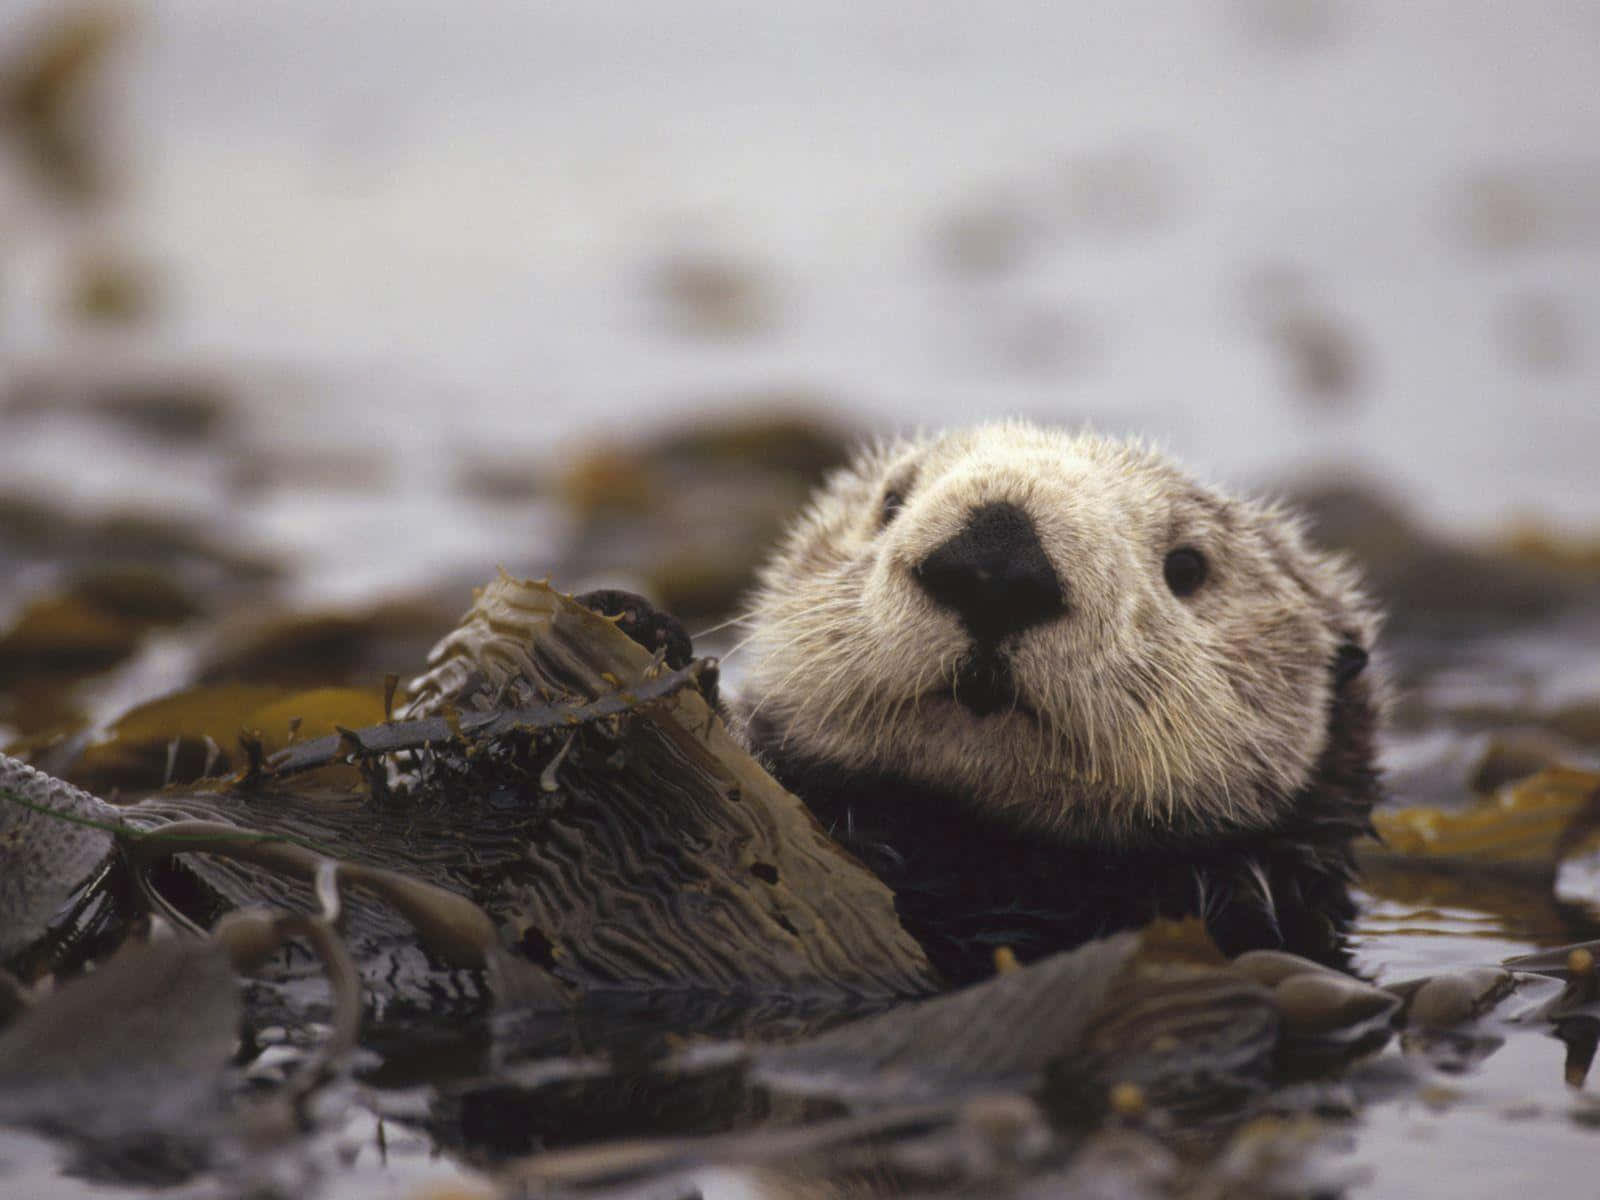 An adorable otter pauses to take in the beauty of nature